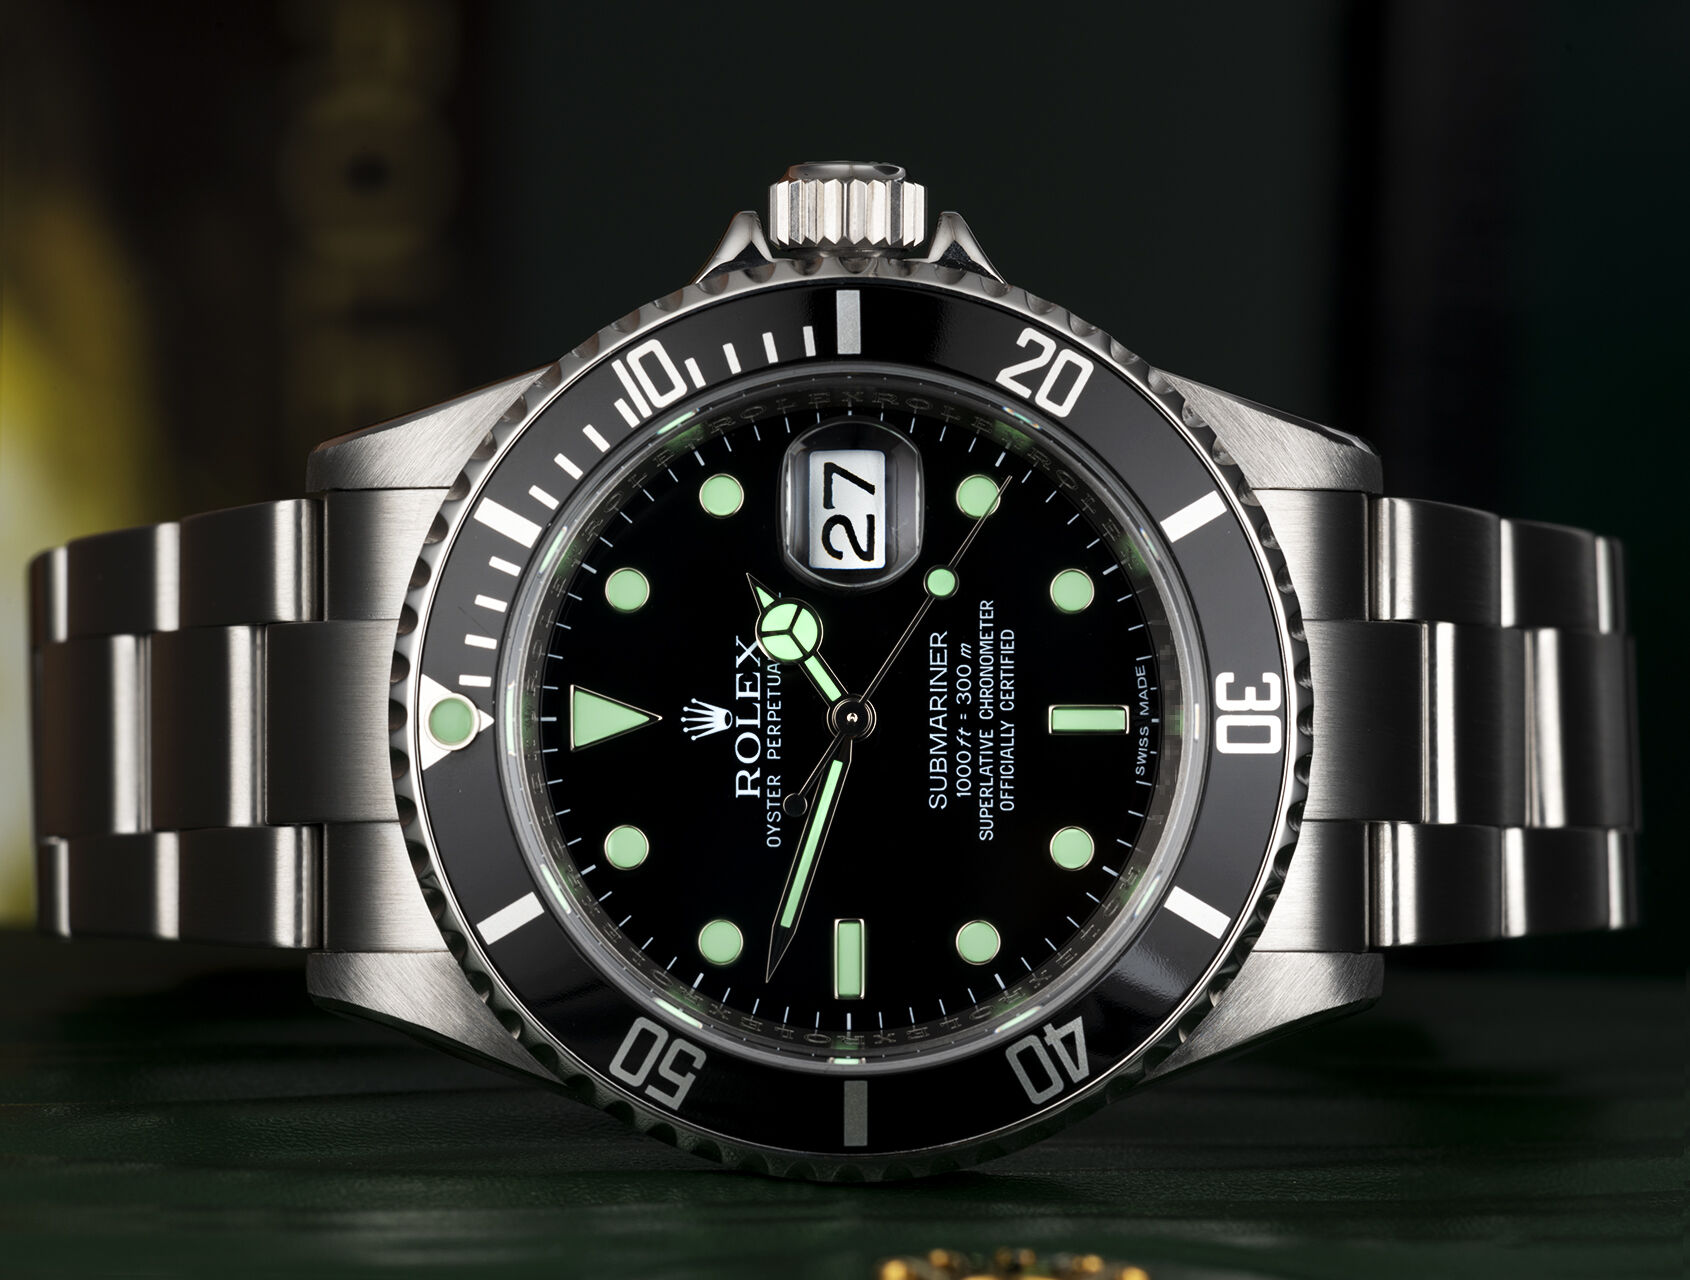 ref 16610 | 16610 - Final Production | Rolex Submariner Date